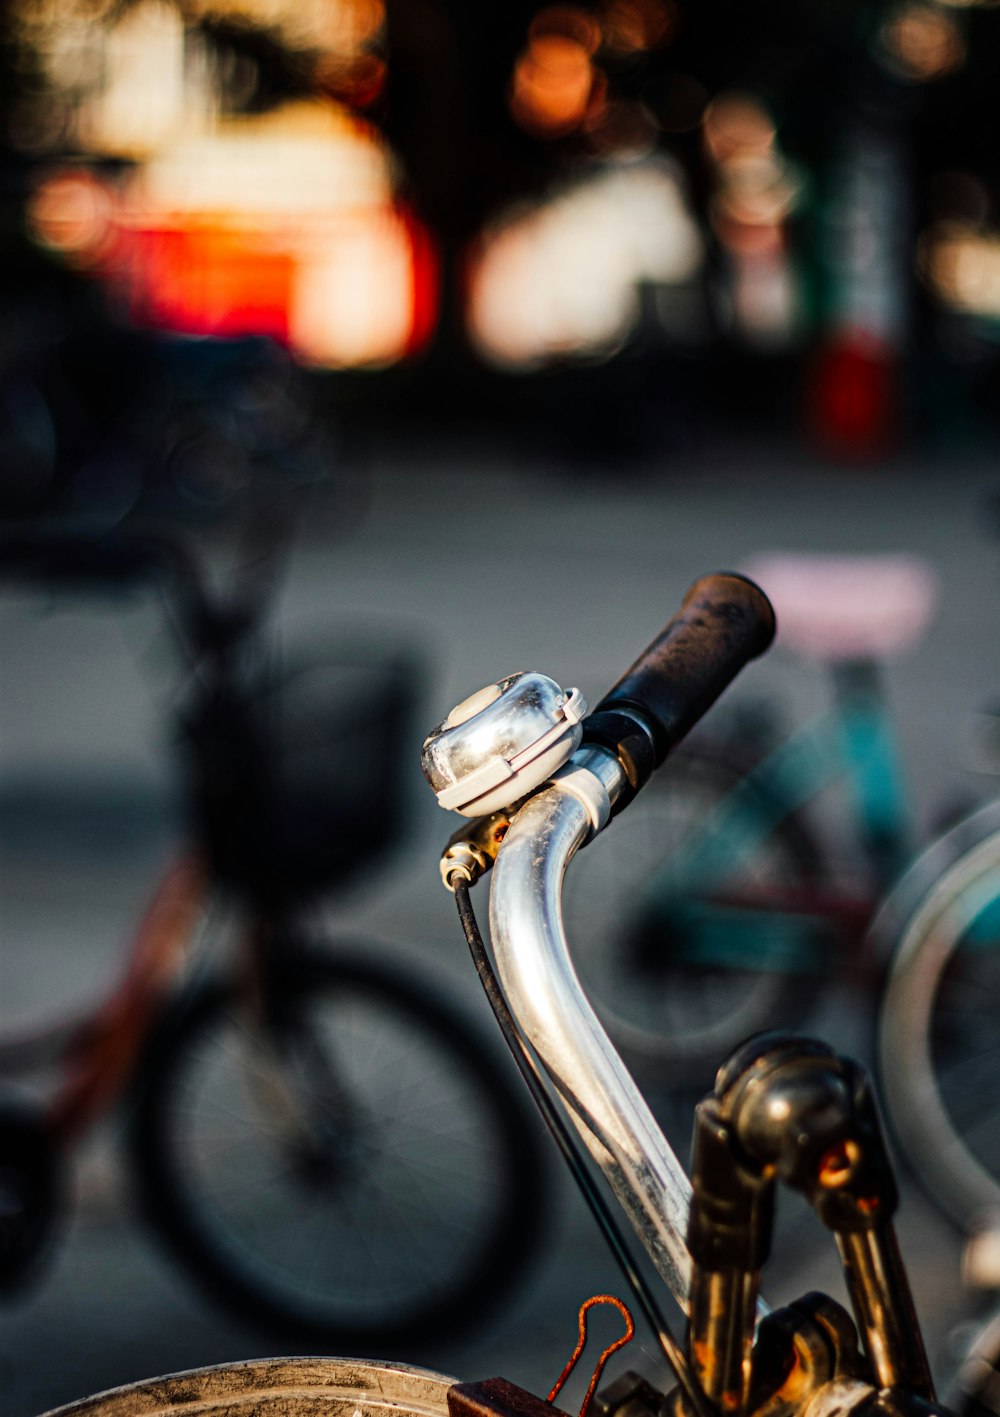 a close up of a bike handlebar with other bikes in the background